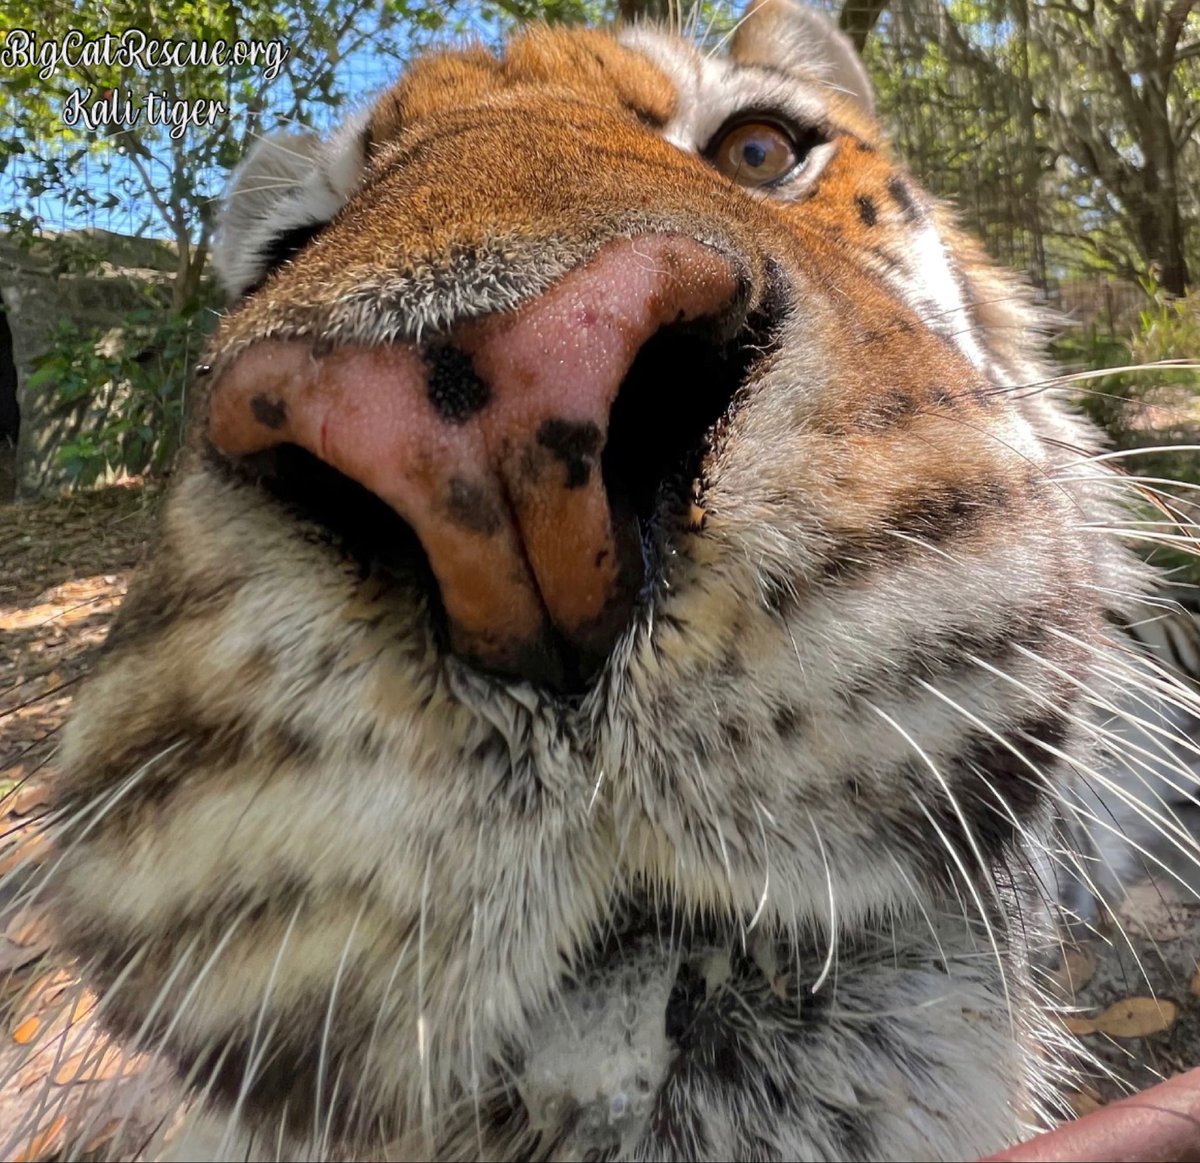 Good morning Big Cat Rescue Friends! ☀️ Kali Tiger checking in to see if you are up and at ‘em on this sunny Monday morning! Have a great day everyone! #GoodMorning #BigCats #BigCatRescue #Rescue #Cats #Monday #Florida #Sanctuary #Tiger #CaroleBaskin